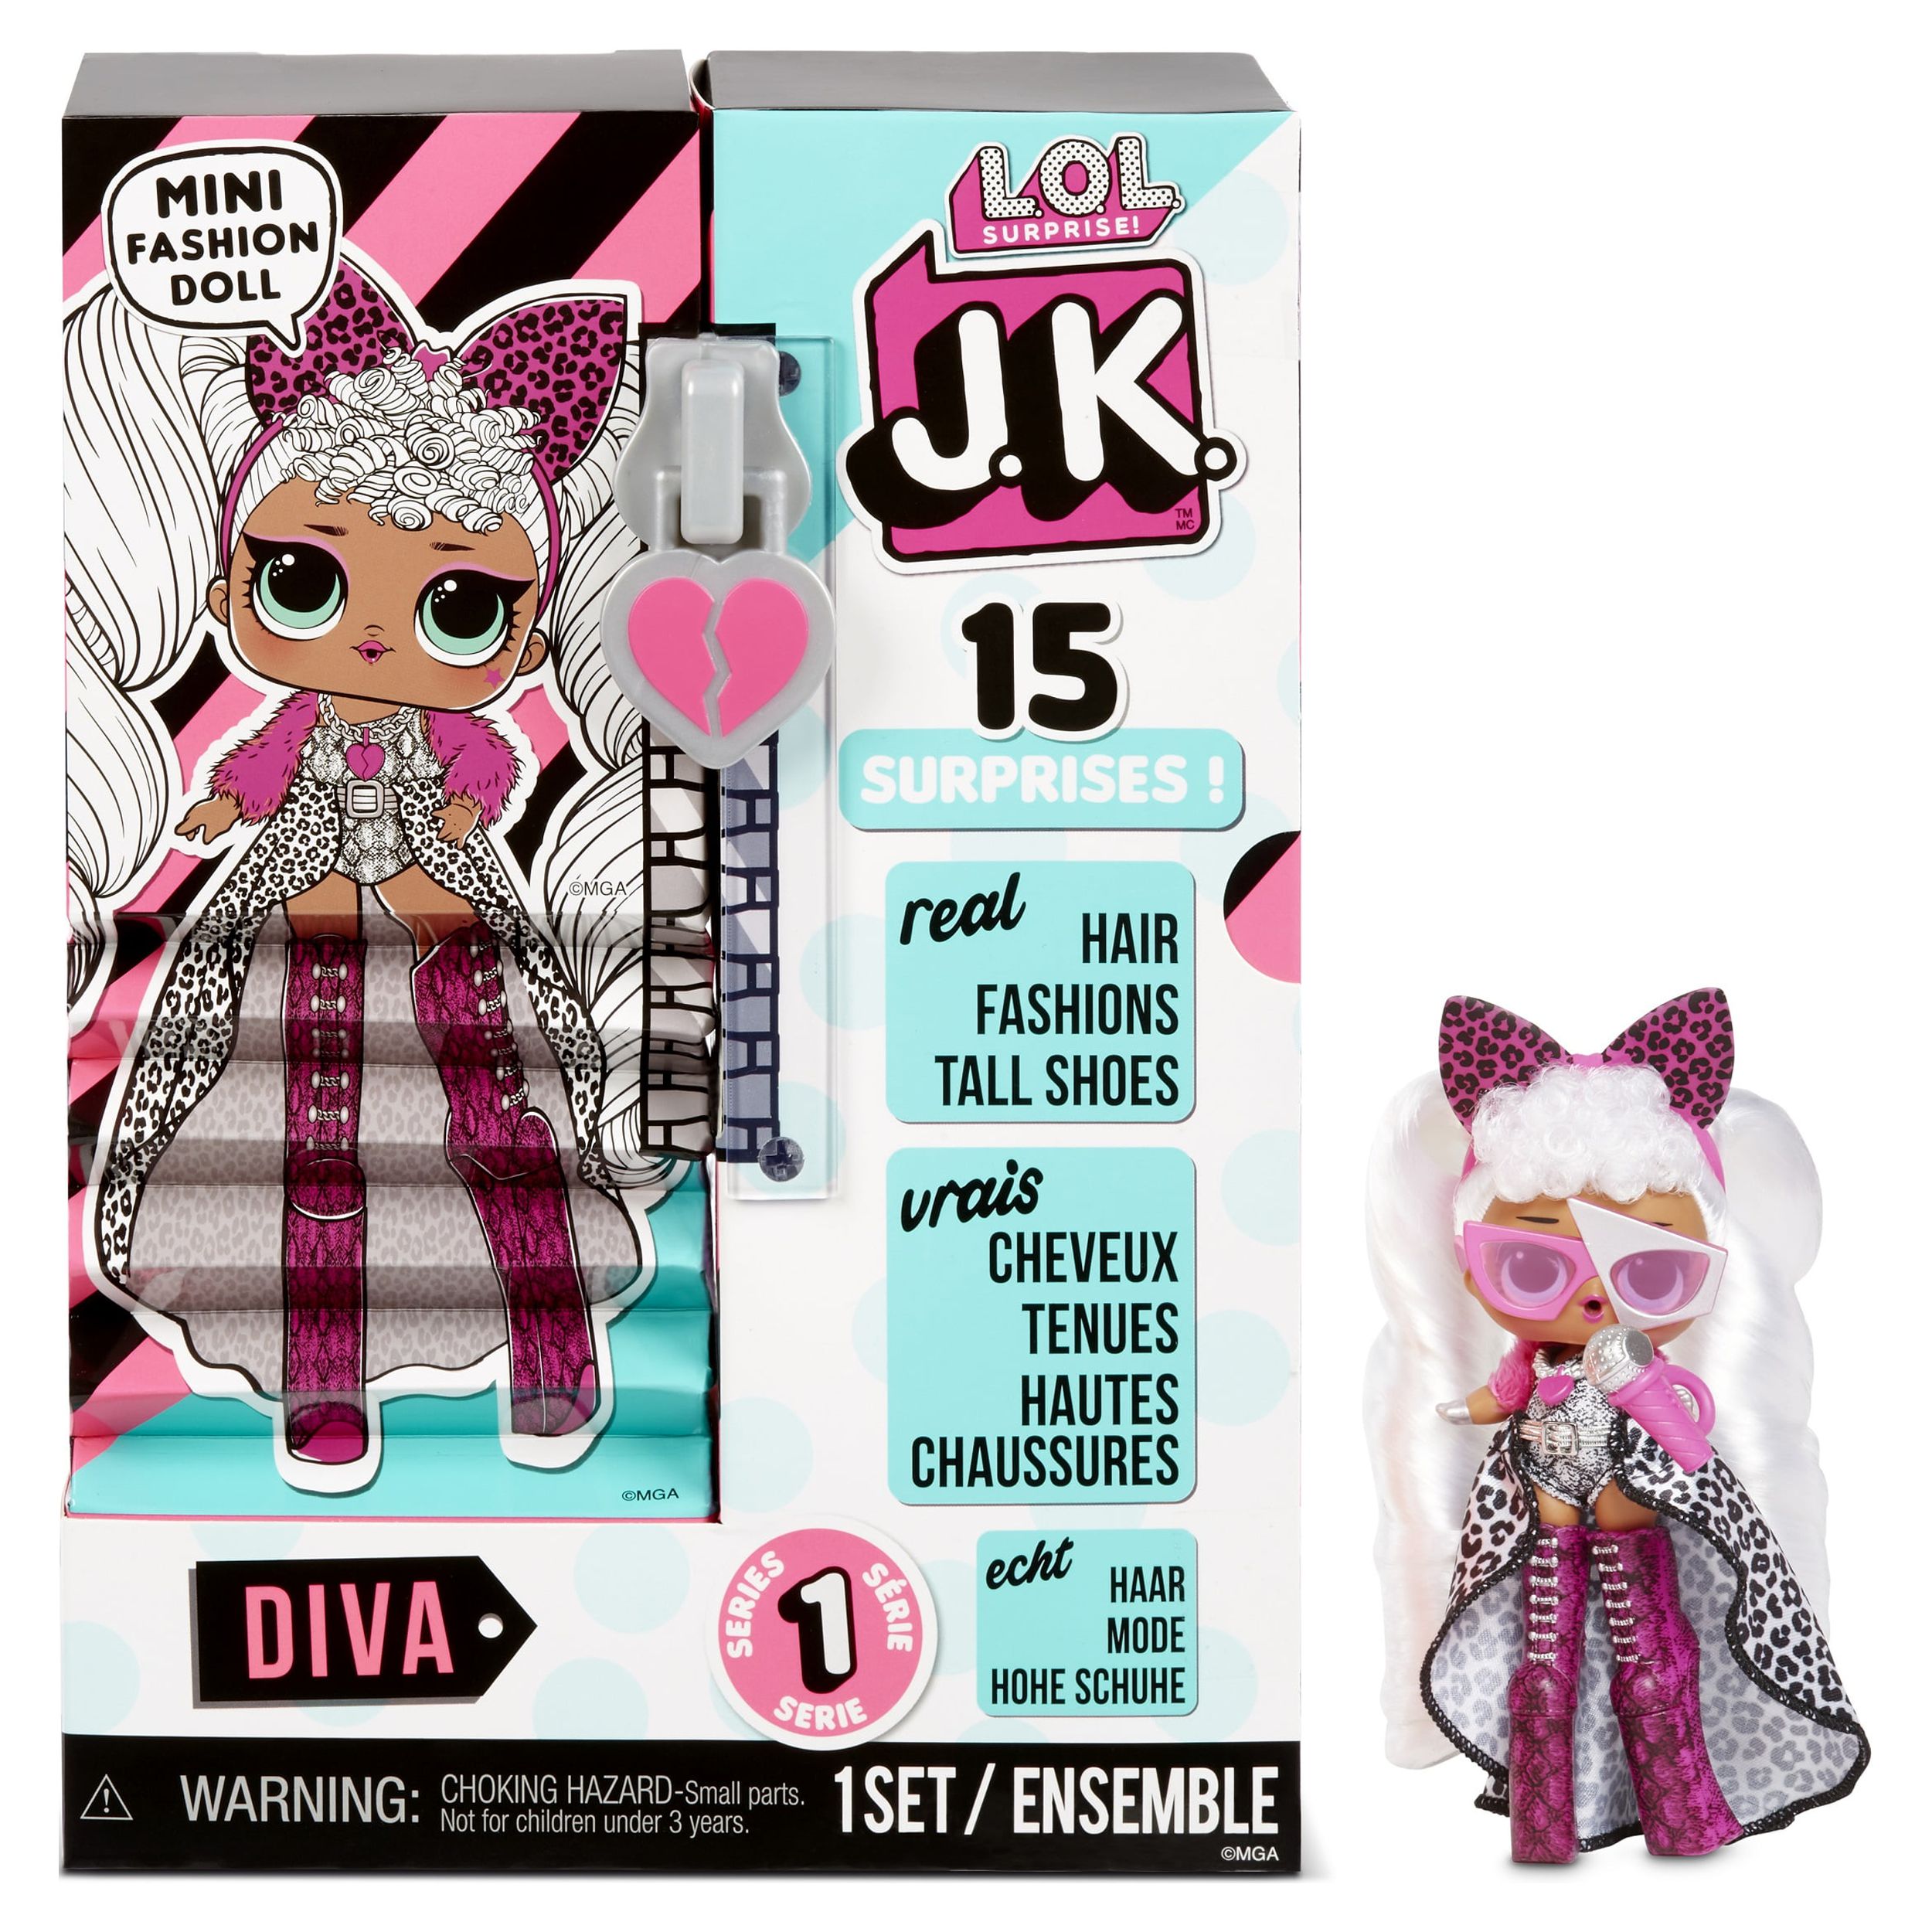 LOL Surprise JK Diva Mini Fashion Doll with 15 Surprises, Great Gift for Kids Ages 4 5 6+ - image 1 of 7